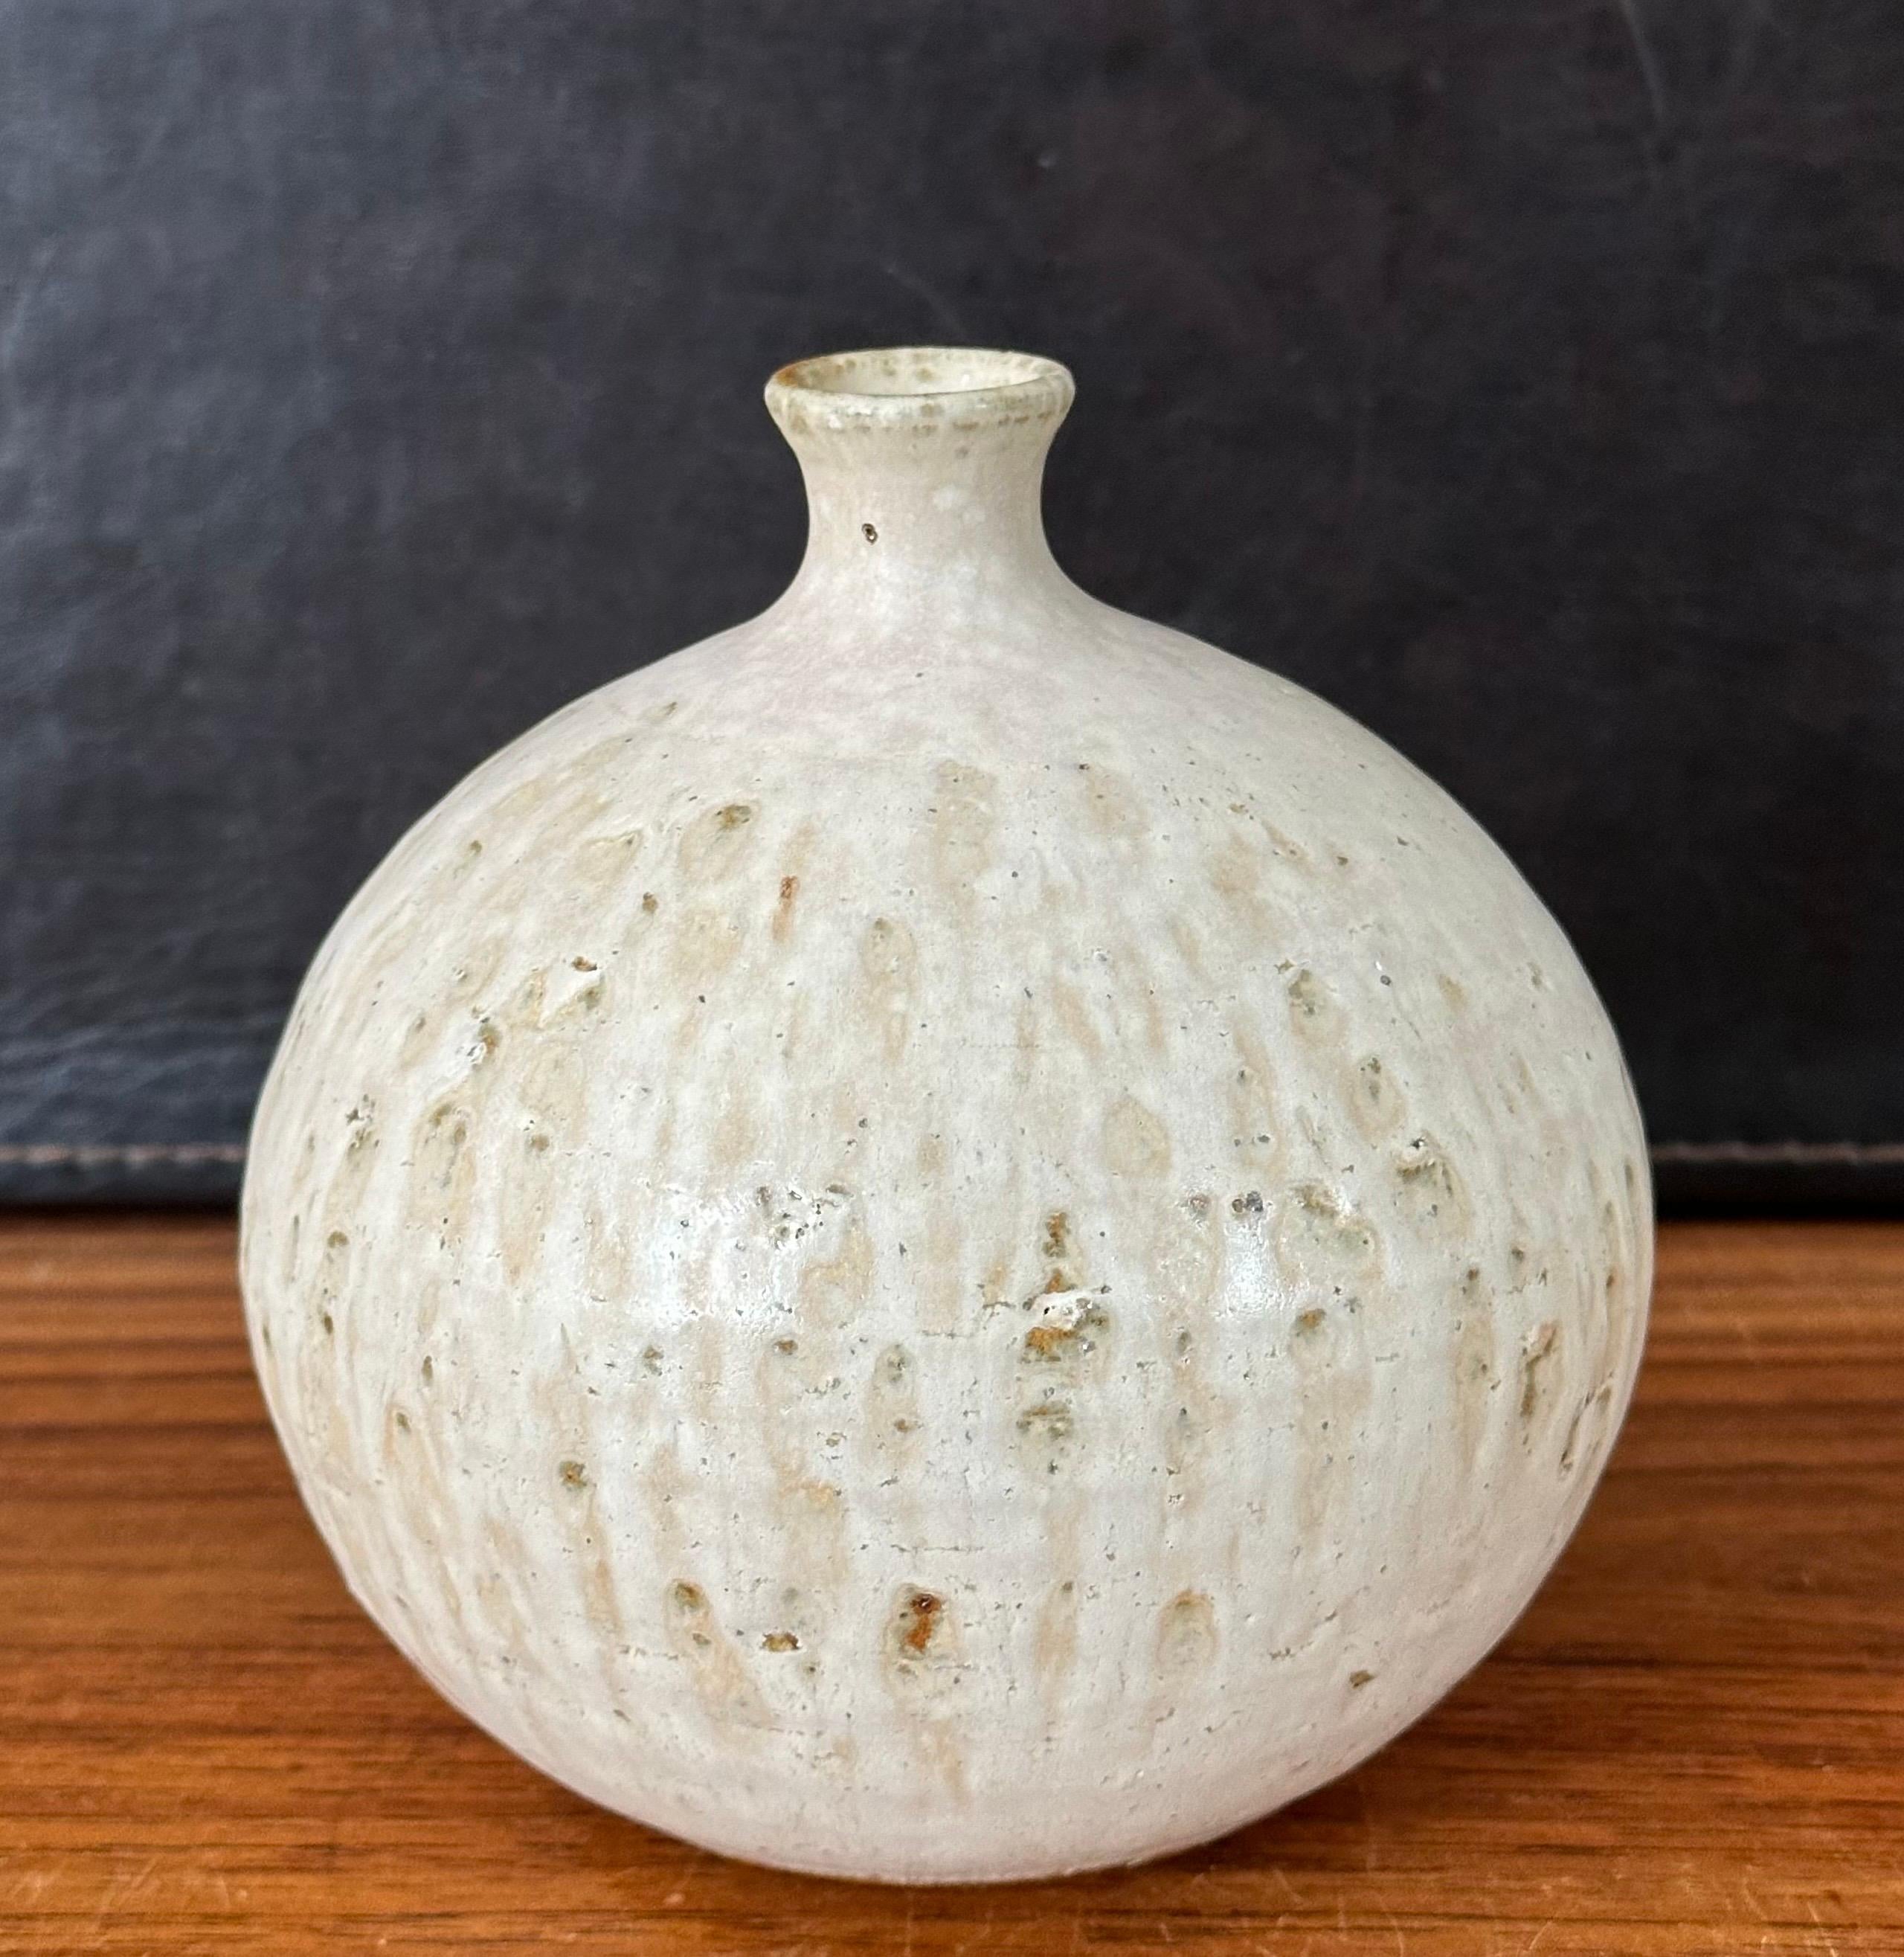 California design studio stoneware weed pot / vase, circa 1970s. The pot is in very good vintage condition and measures 5